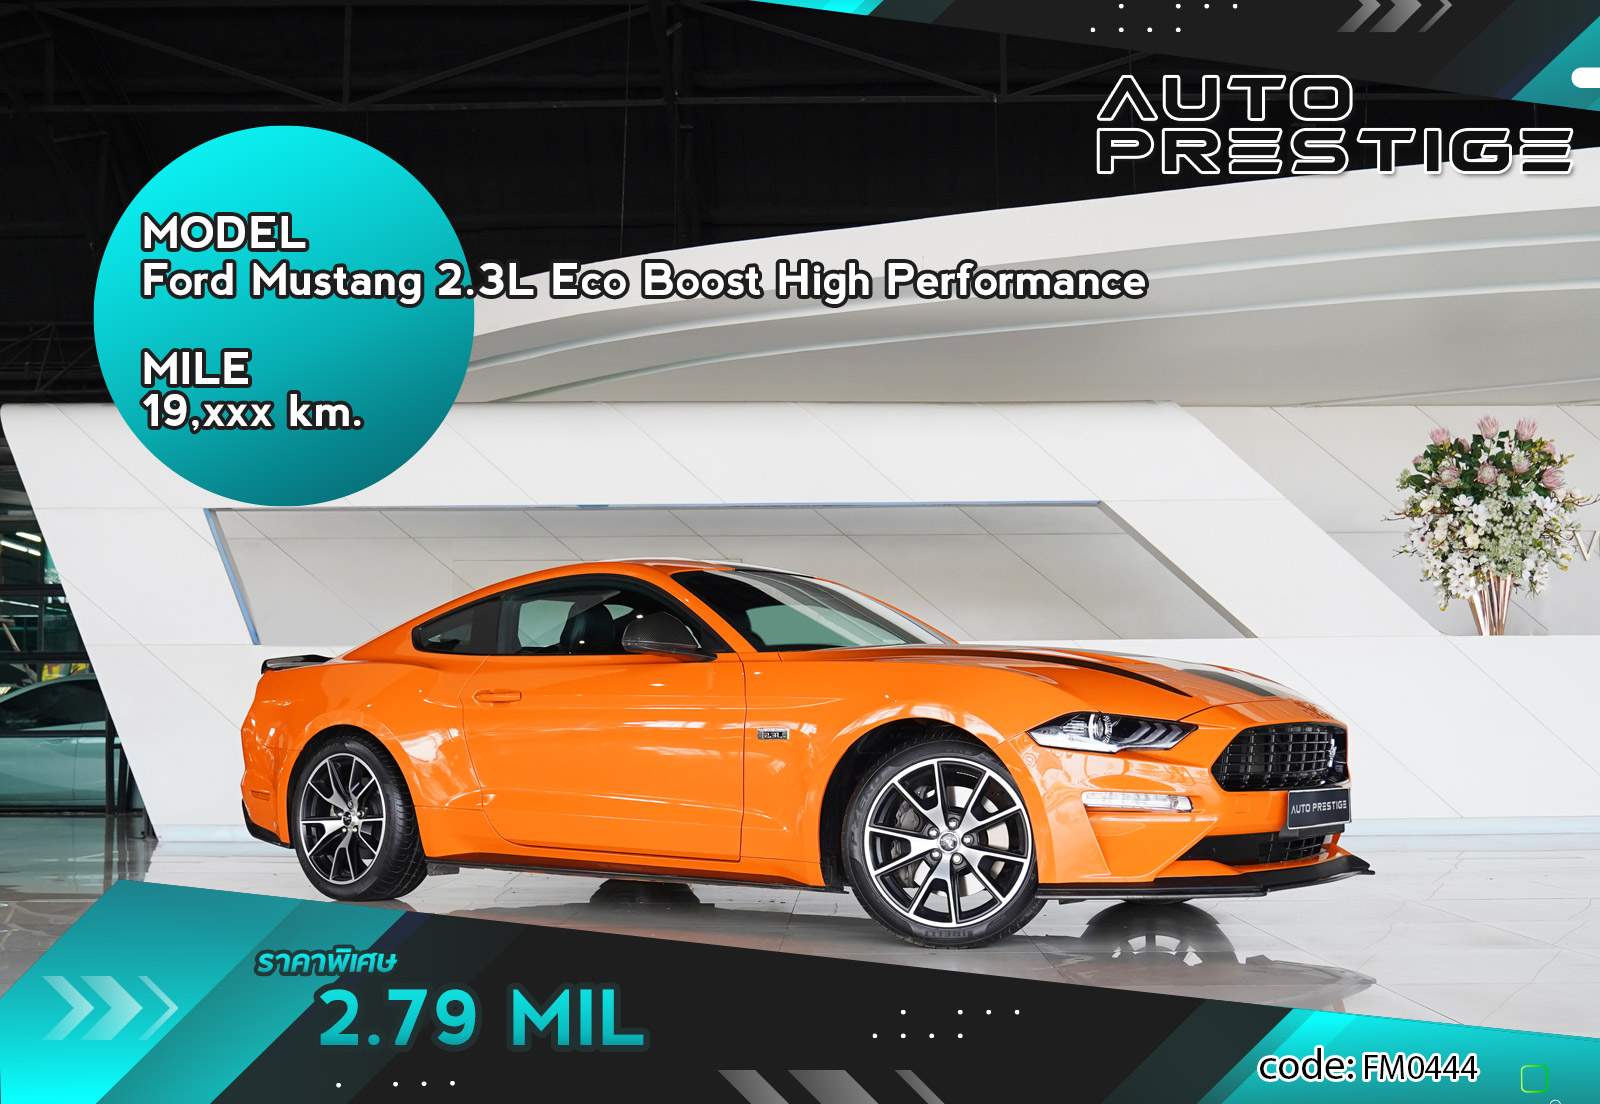 Ford Mustang 2.3L Eco Boost High Performance